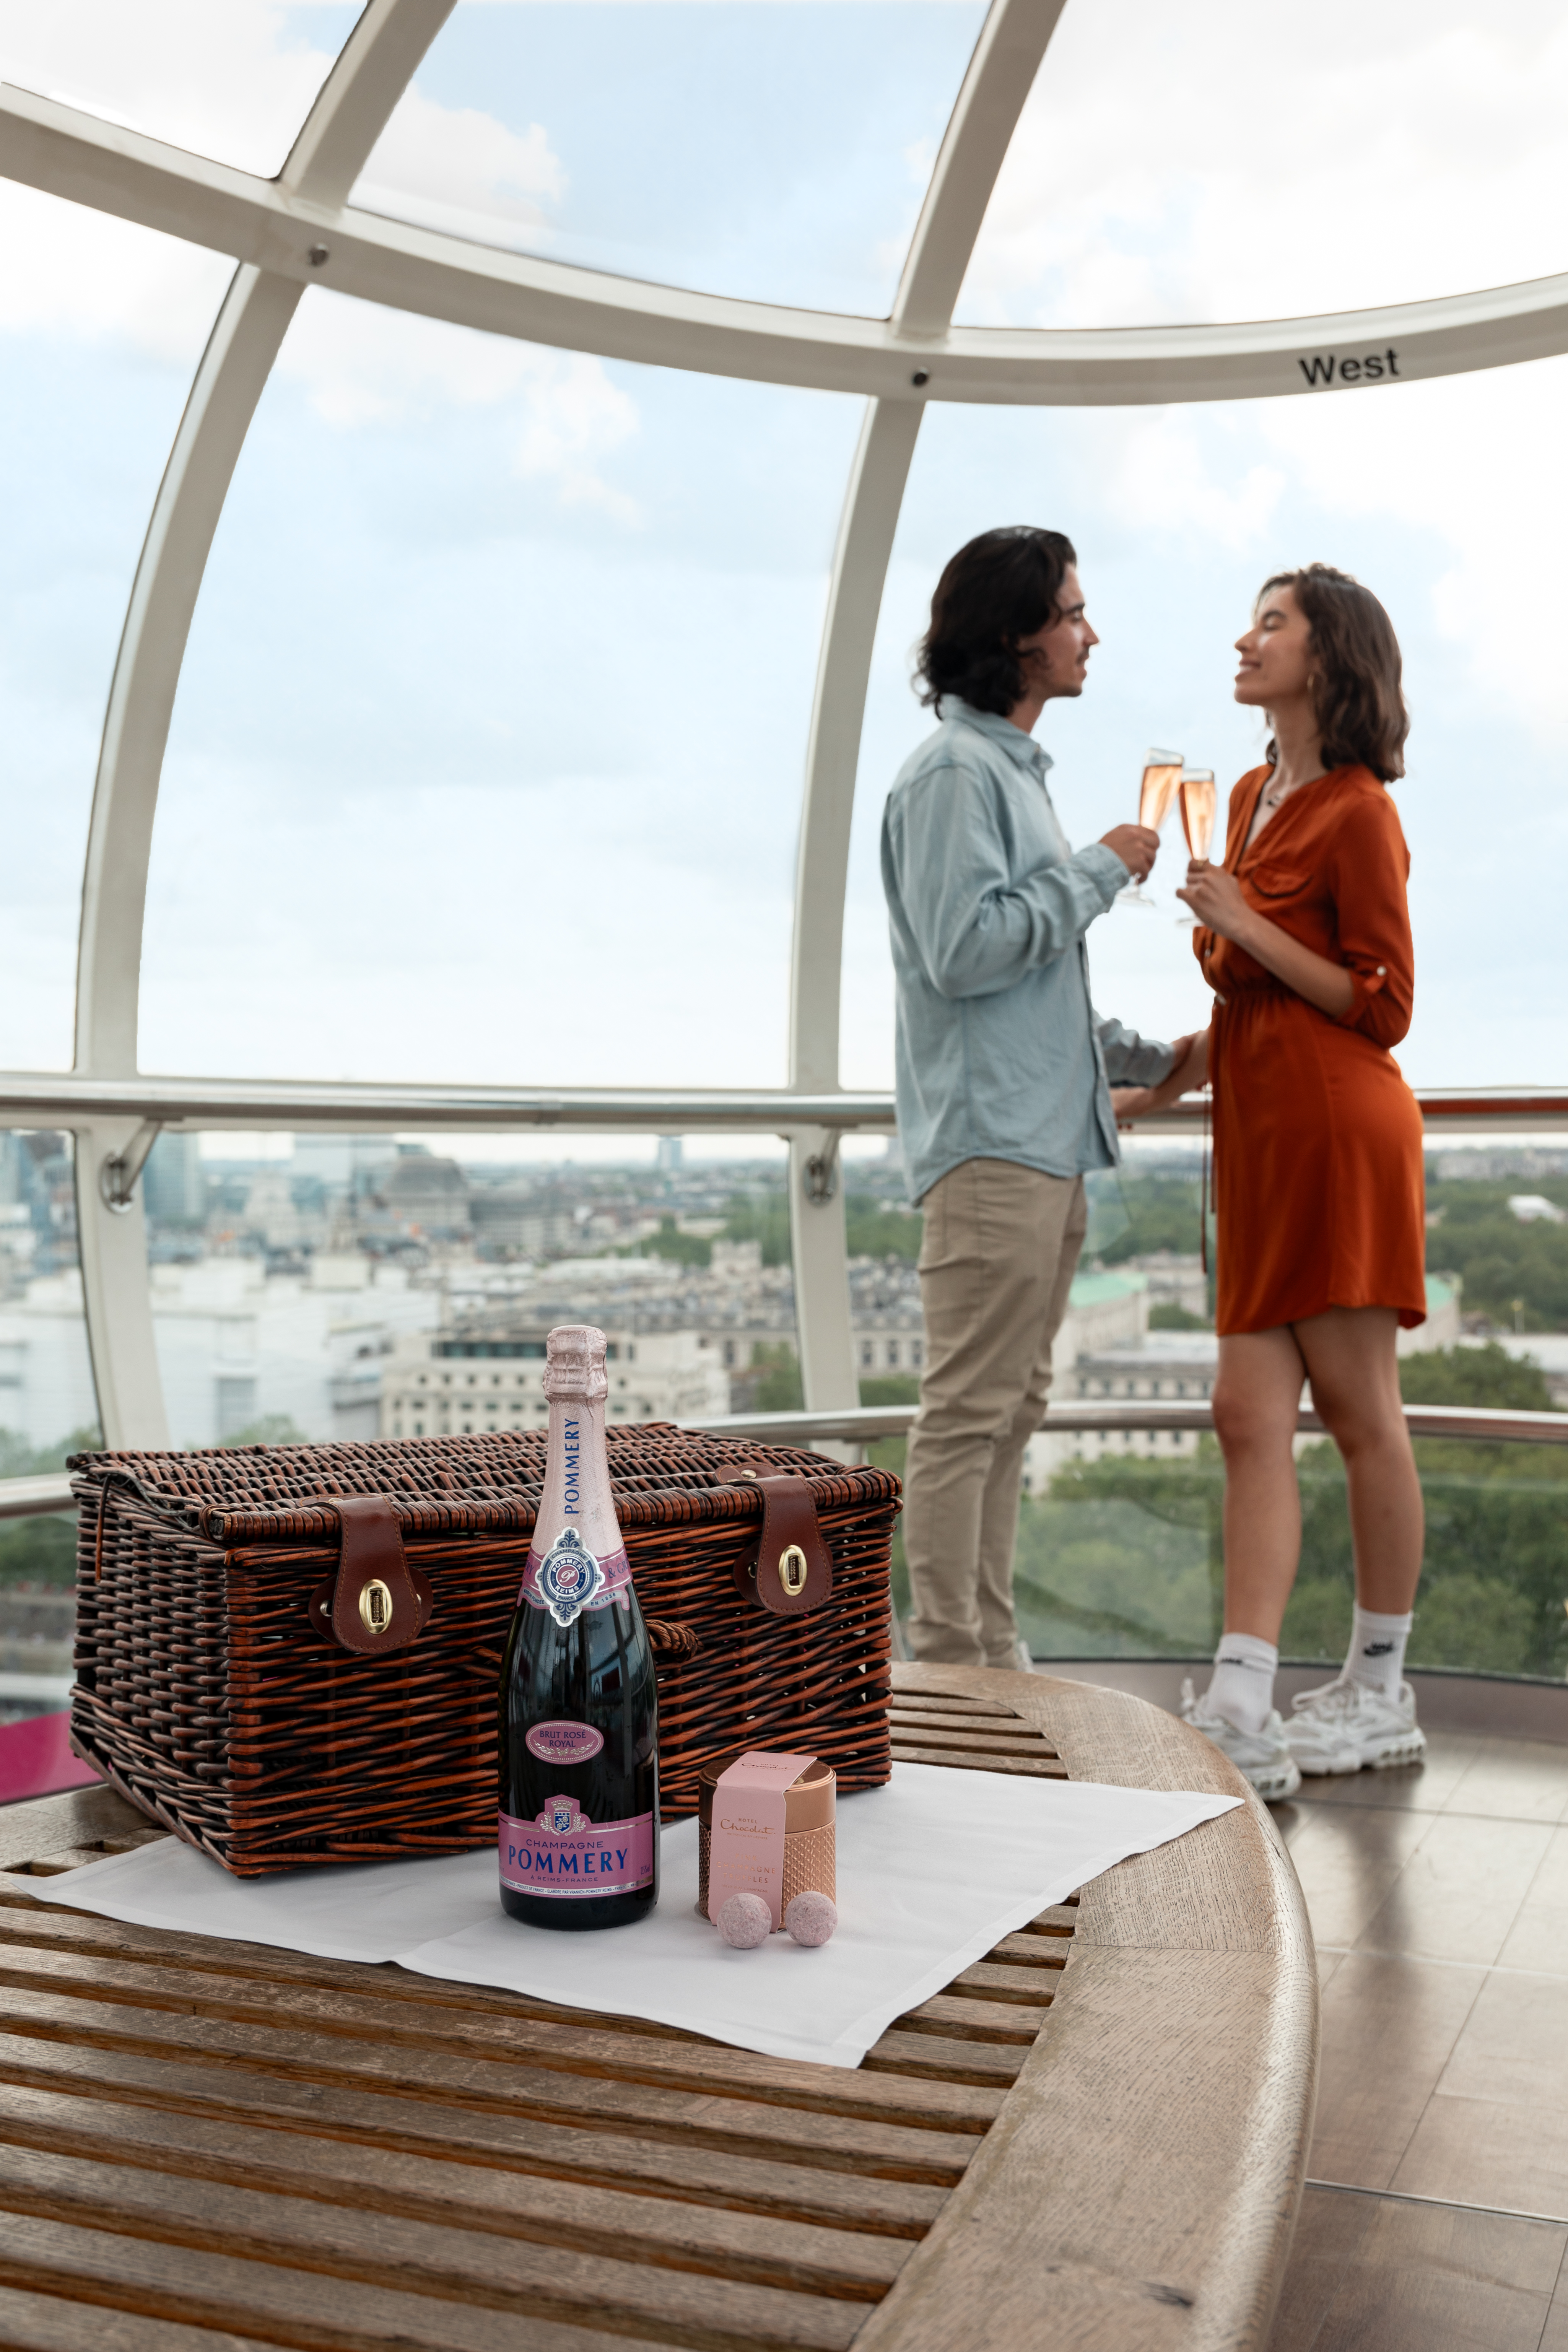 Cupid's Pod Experience at the London Eye